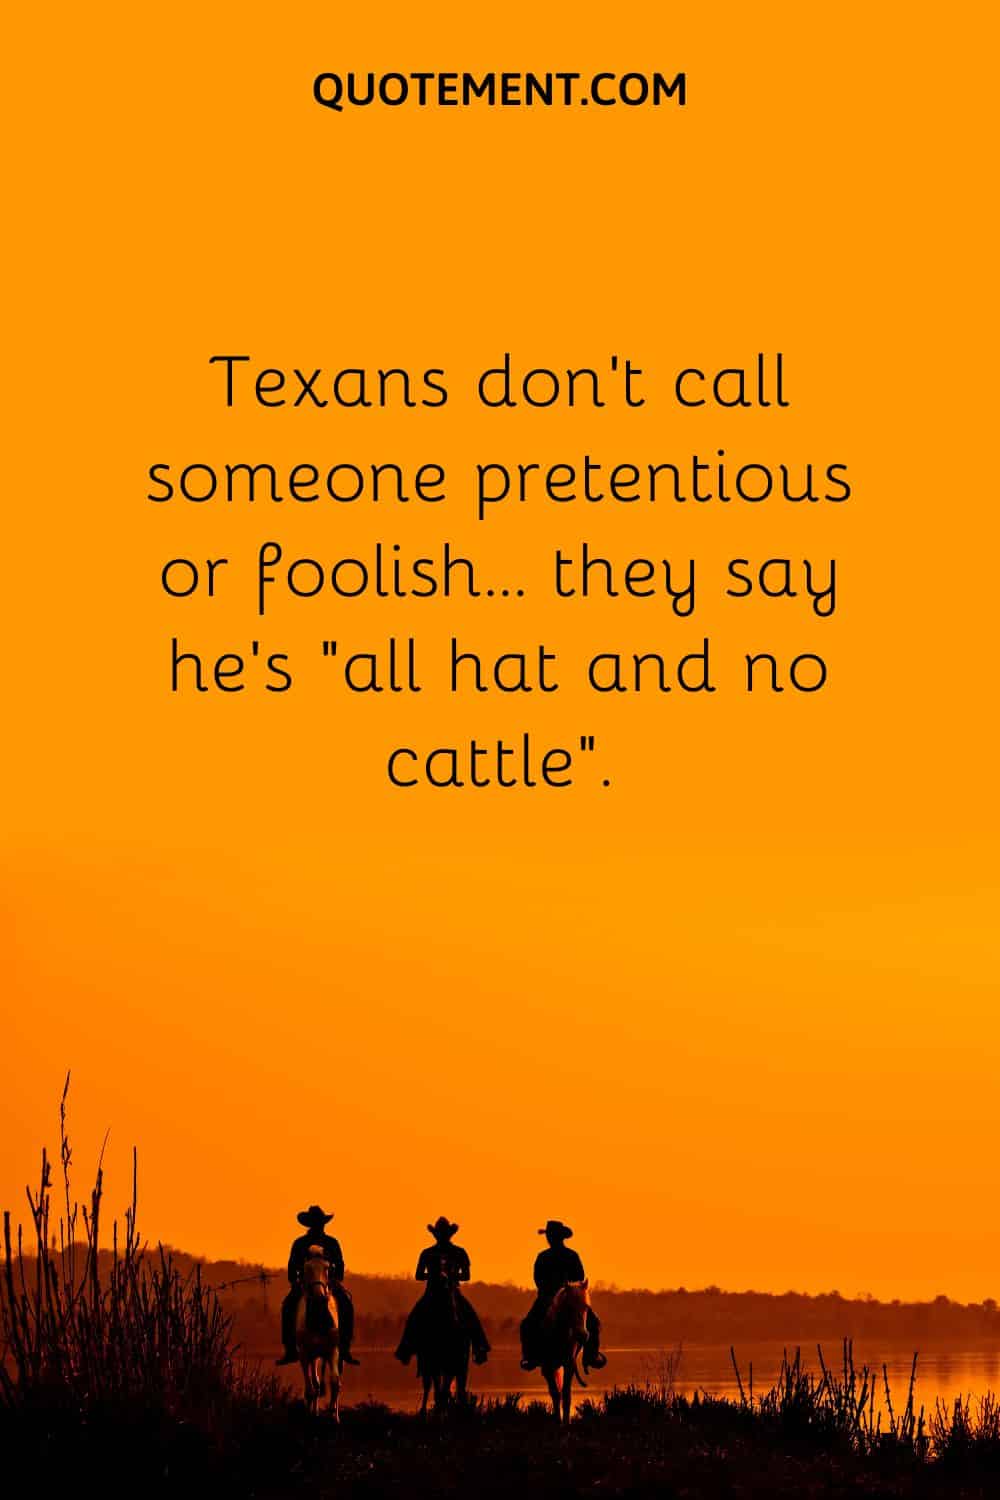 Texans don’t call someone pretentious or foolish… they say he’s all hat and no cattle.